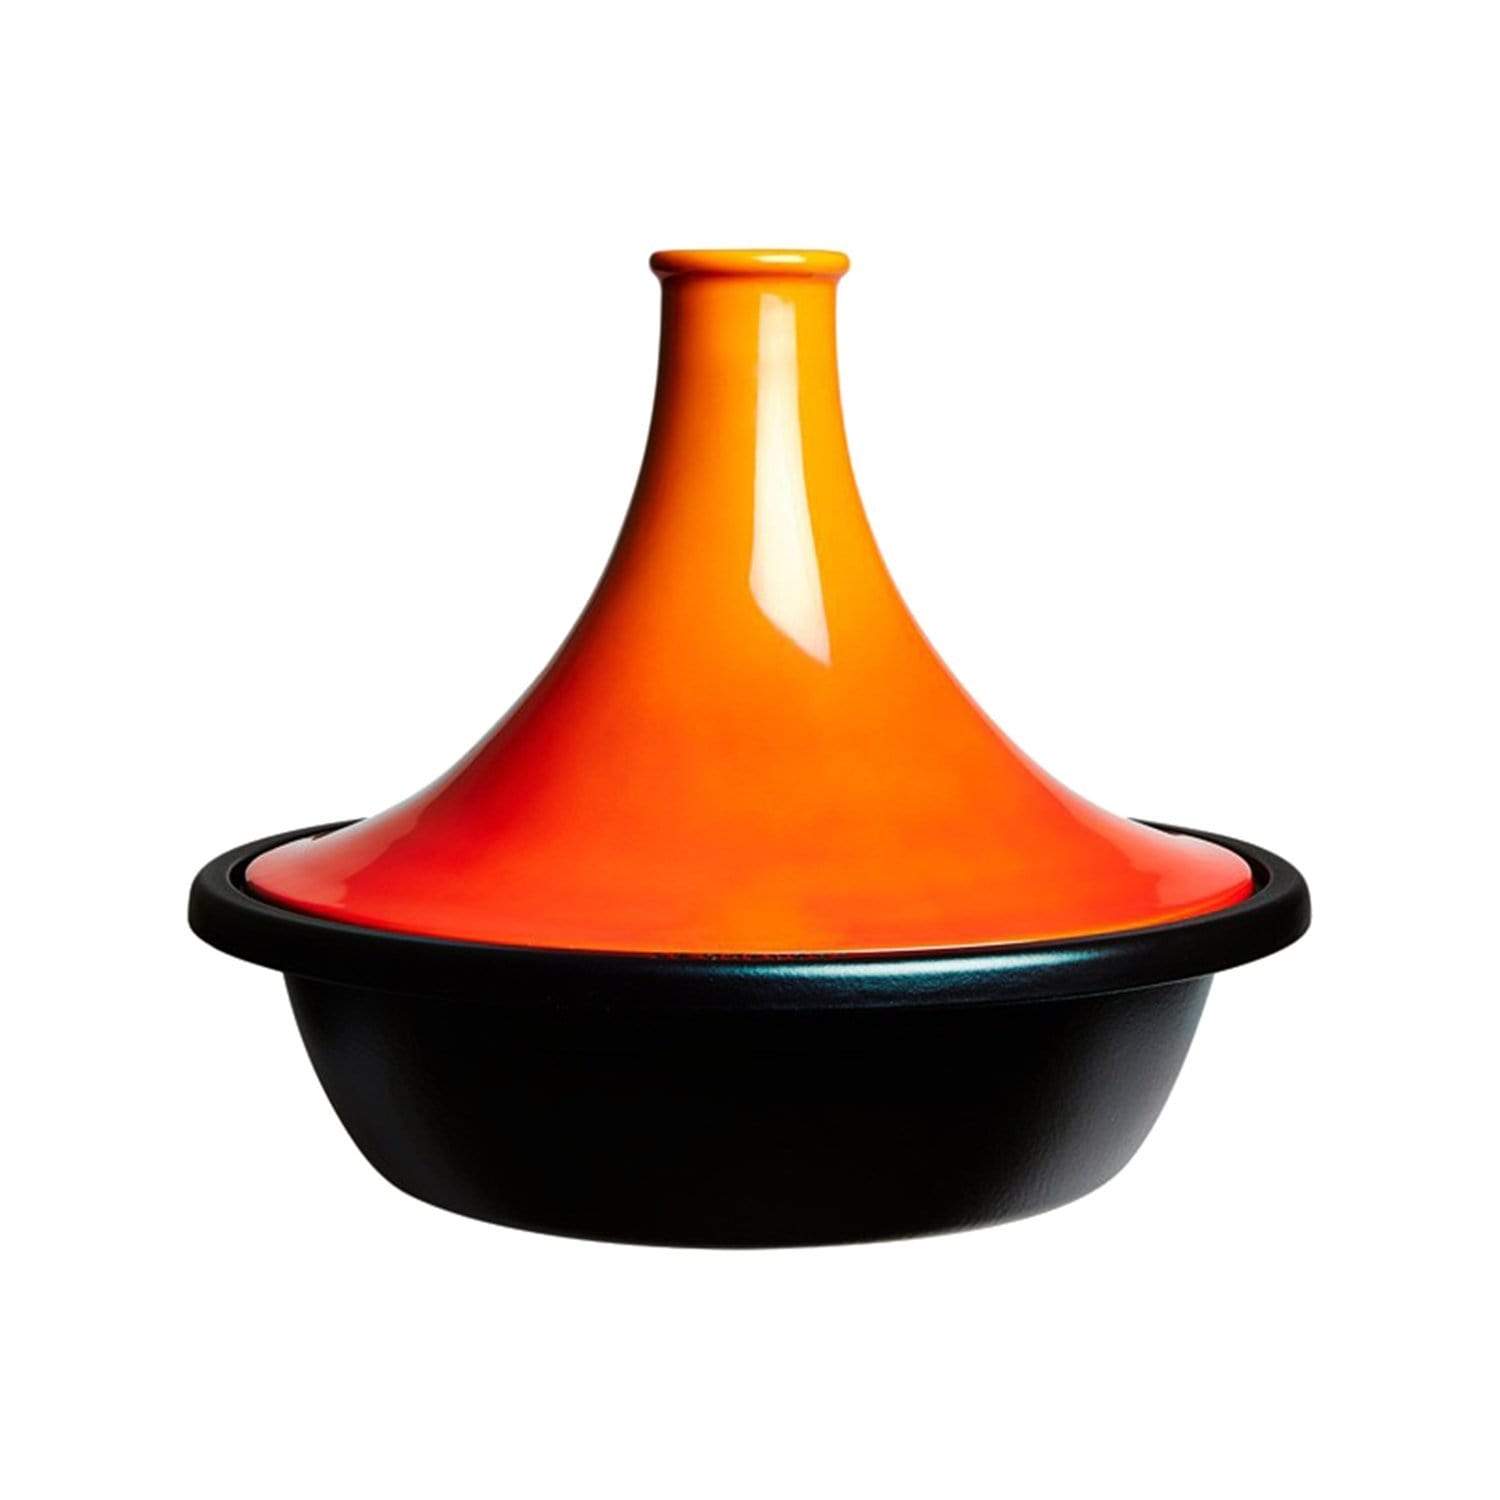 Le Creuset Tajine Special Cookware Accessory - Volcanic Red - 25138310900422 - Jashanmal Home